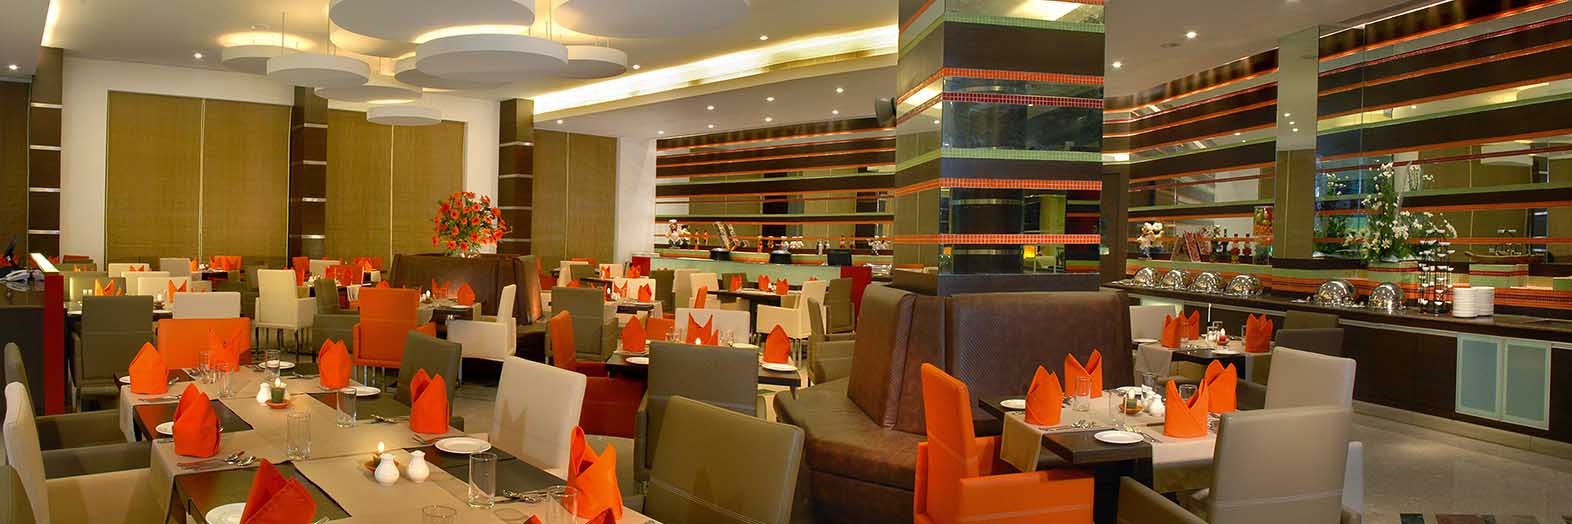 Fortune Select Trinity – Bengaluru Hotels Dining